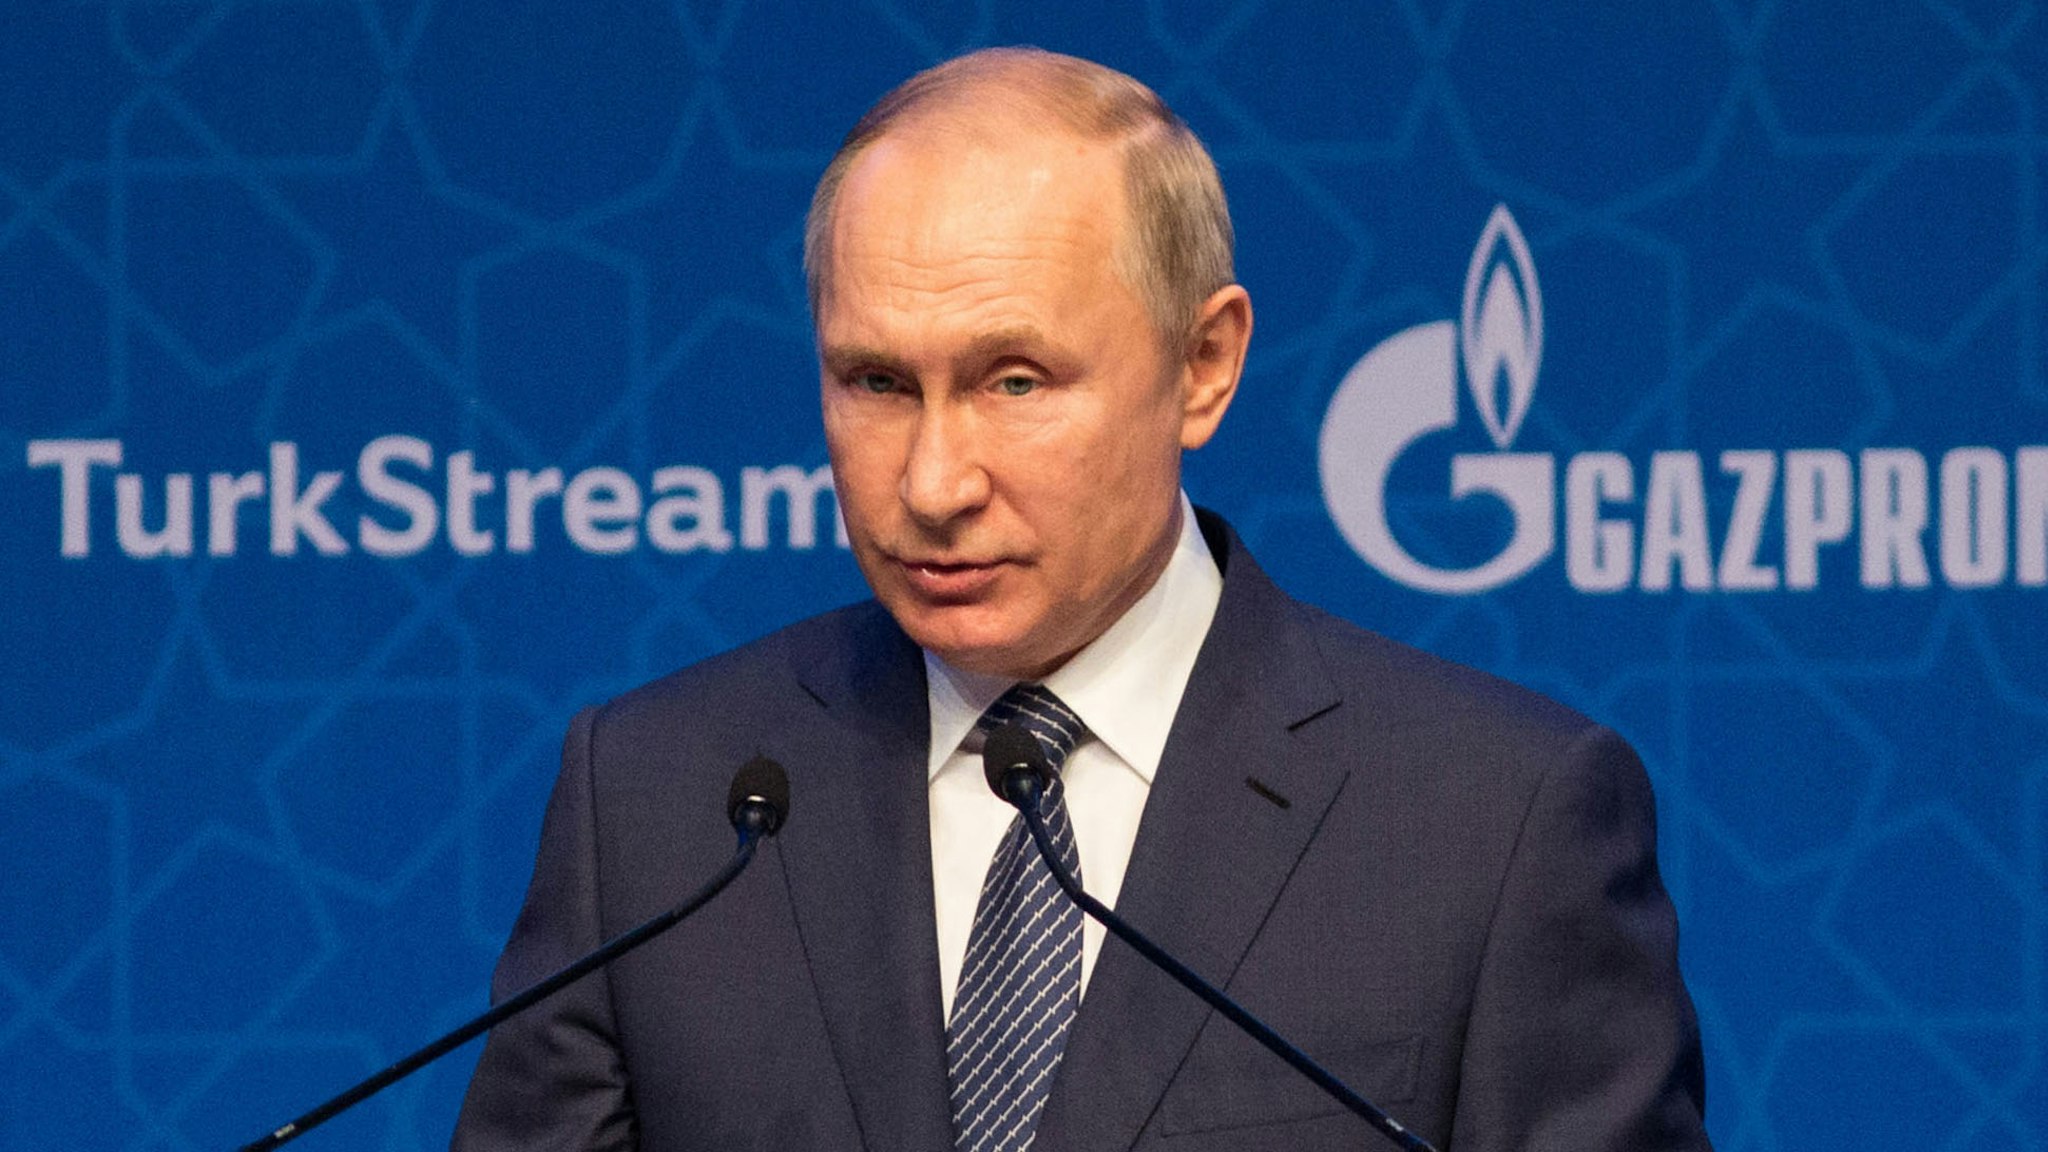 Vladimir Putin, Russia's president, speaks during the inauguration ceremony for the TurkStream natural gas pipeline, operated by Gazprom PJSC and Botas AS, in Istanbul, Turkey, on Wednesday, Jan. 8, 2020. TurkStream is set to carry Russian gas under the Black Sea to Turkey and supply several countries in southeast Europe once fully operational, just as U.S. sanctions stall another Gazprom PJSC export line.